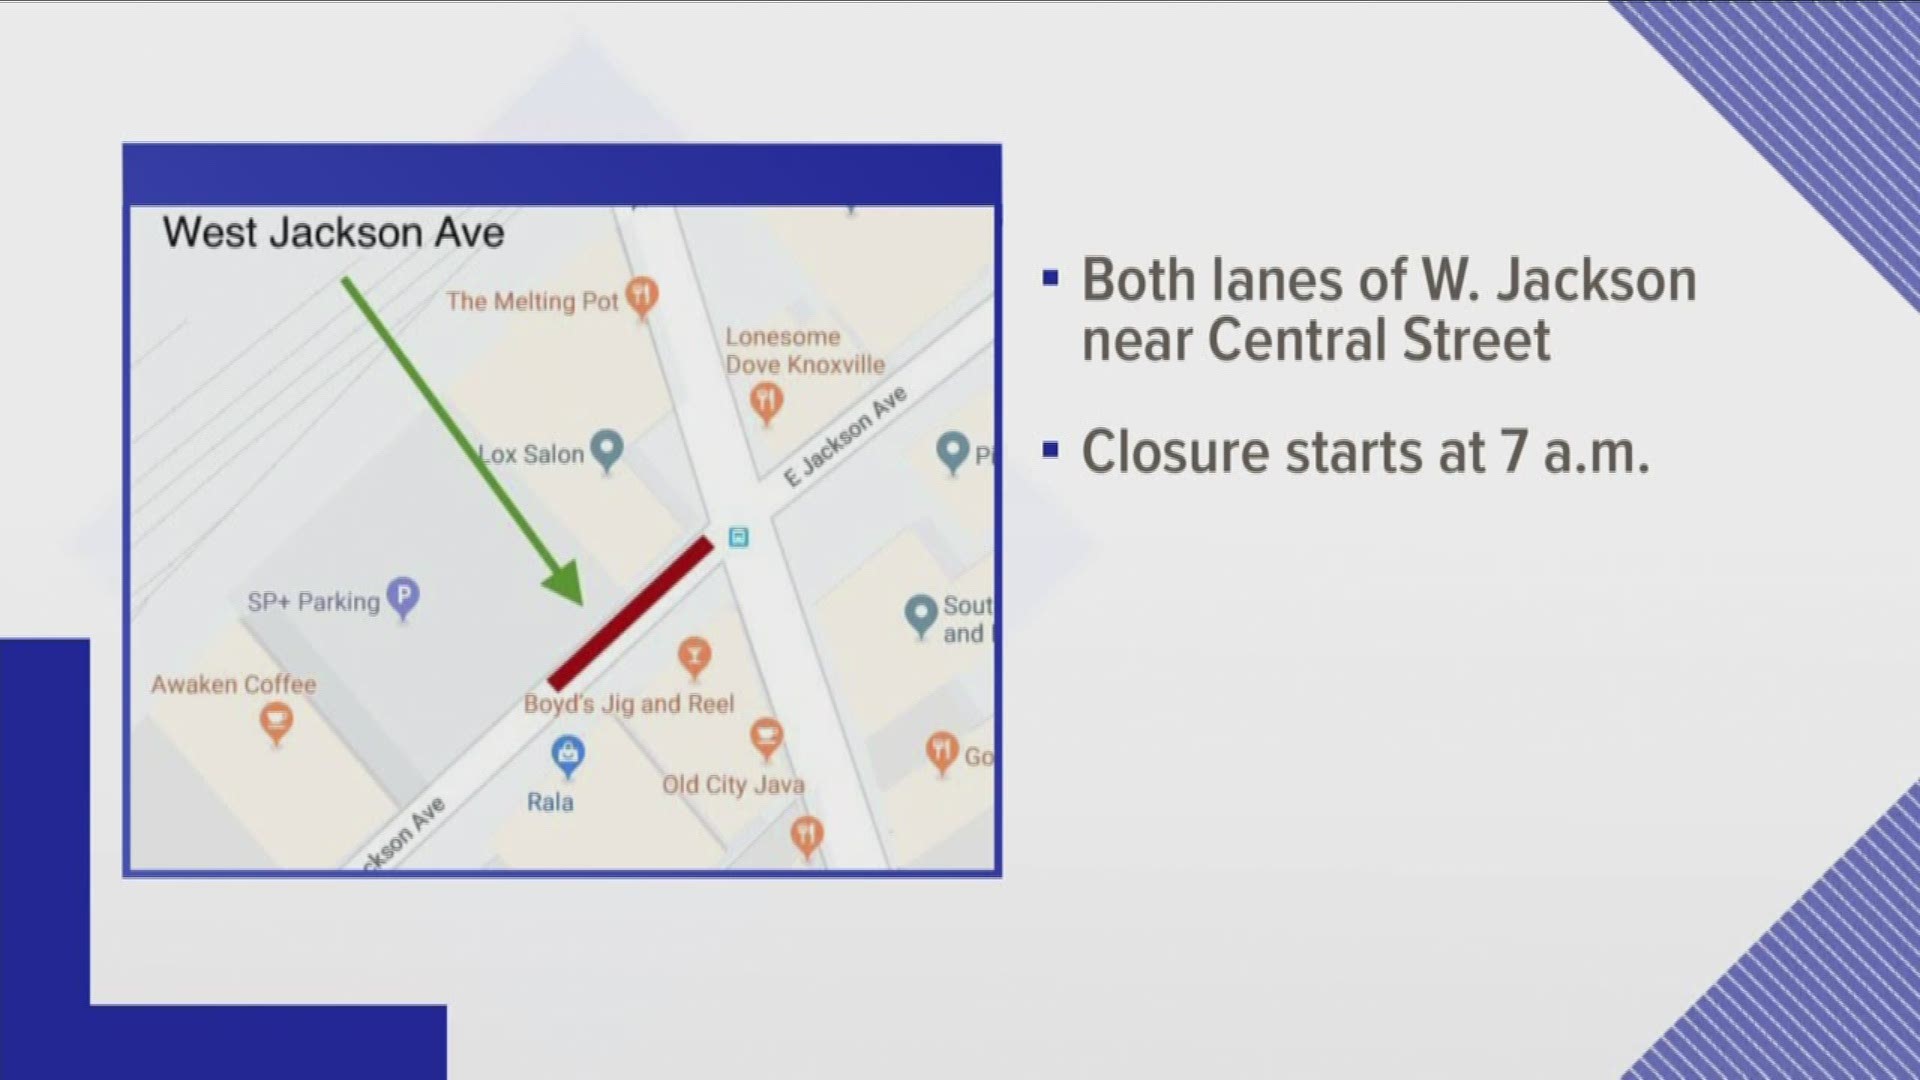 Crews will close both lanes of West Jackson Avenue near Central Street starting 7 a.m. Sunday. There's no word on how long the closure will last.